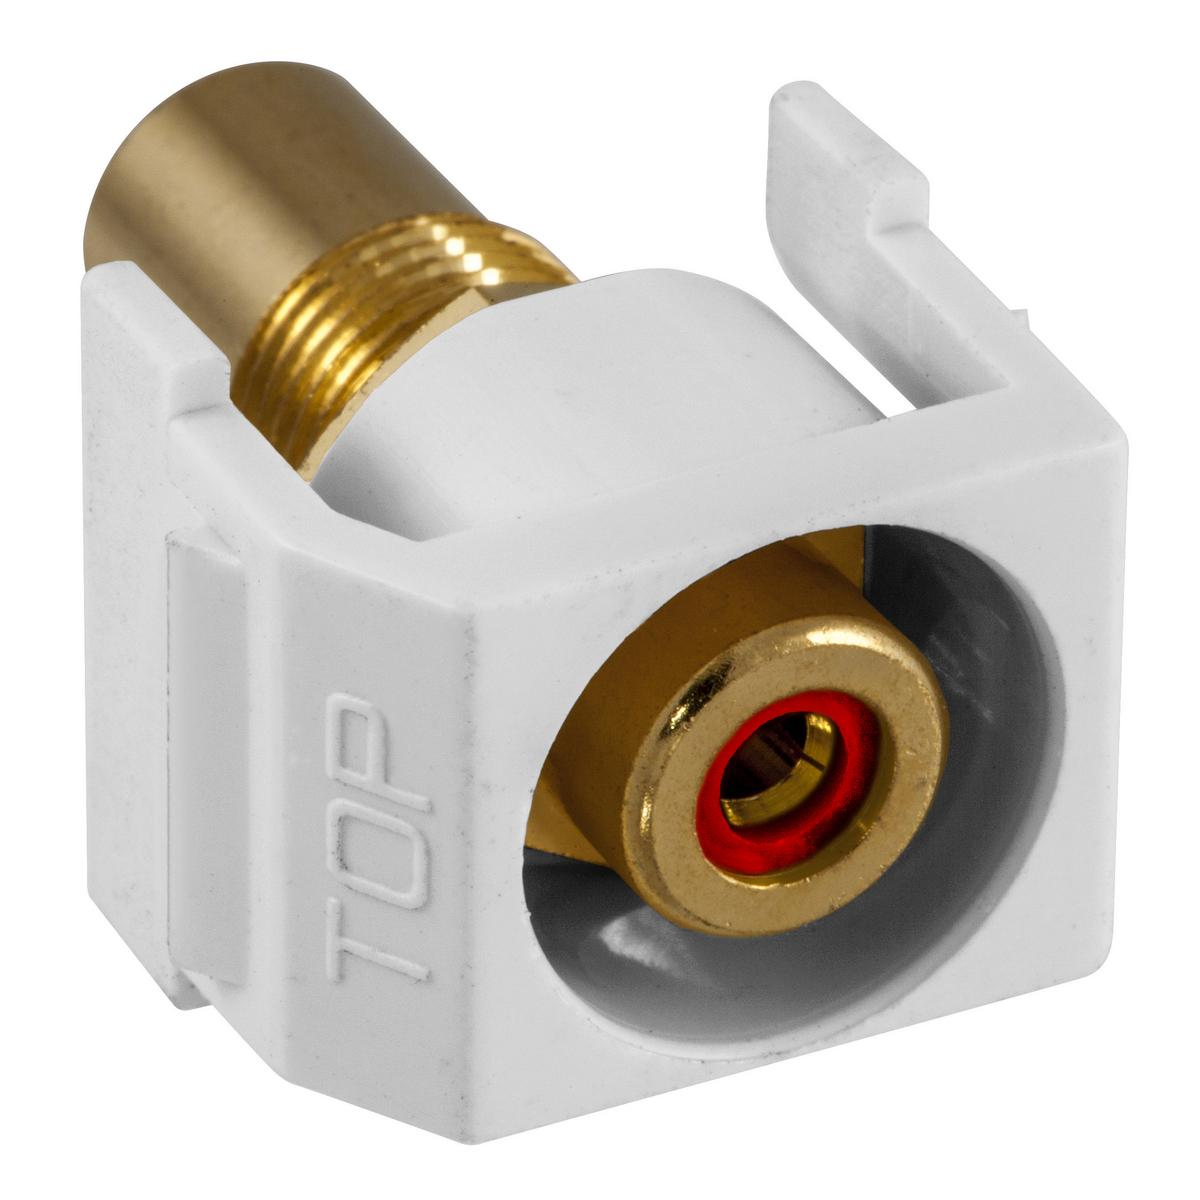 Hubbell SFRCRRW Recessed RCA Connector, Red Insulator, White Housing  ; Flush mount design ; High quality Gold plating ; Deliver composite, component or digital signals ; Standard Product